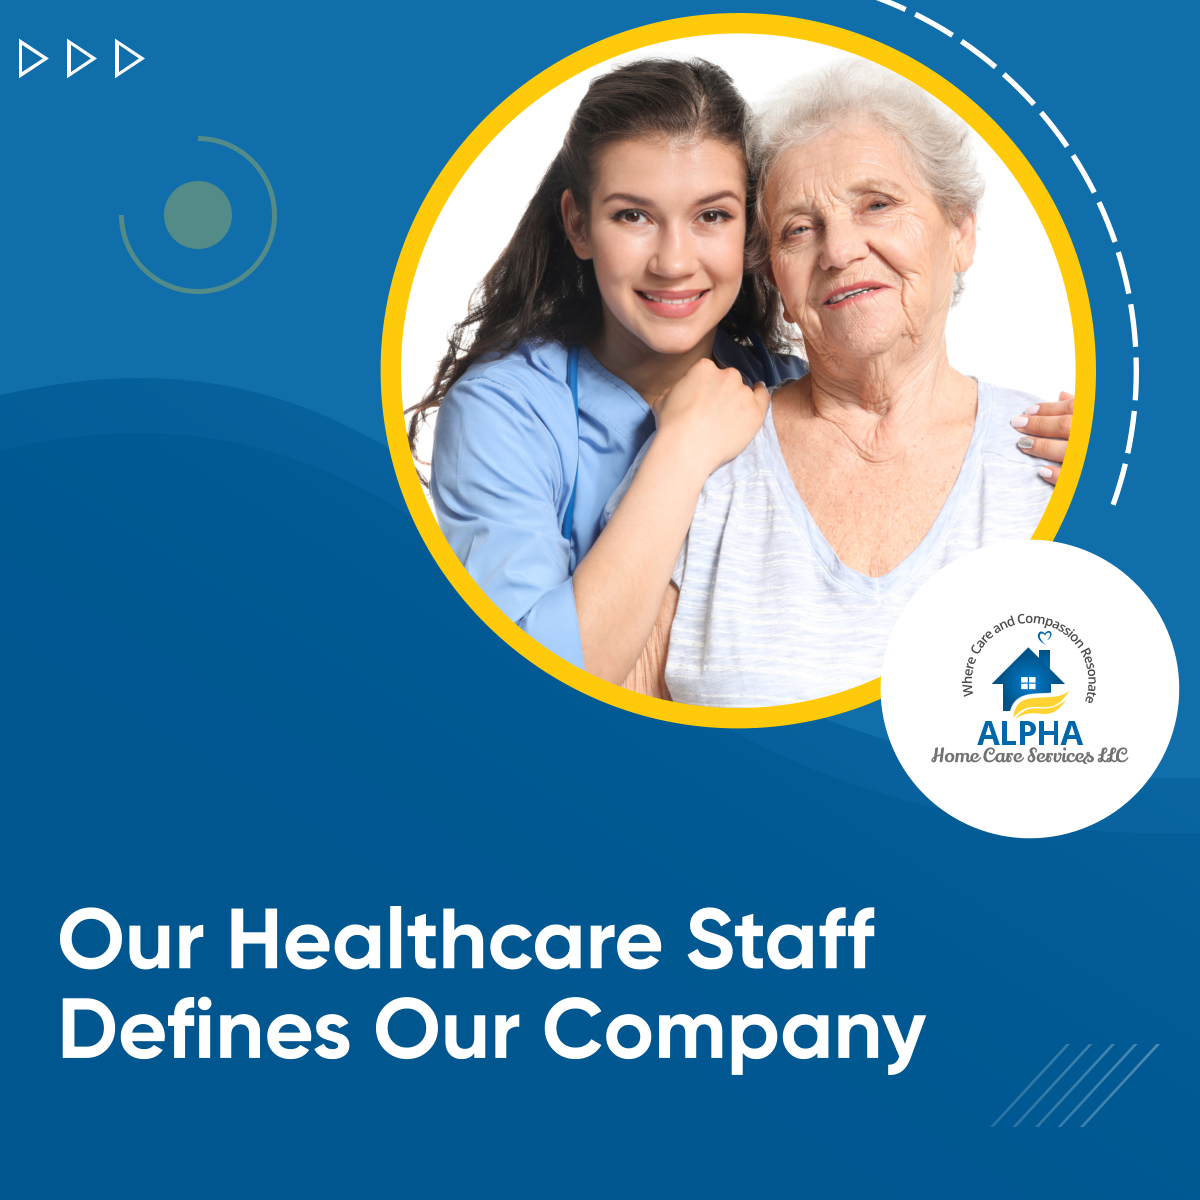 Every caregiver is different and unique, just like our clients. 

Read more: facebook.com/permalink.php?…

#HealthcareStaff #CallUs #FairfaxVA #HomeCare